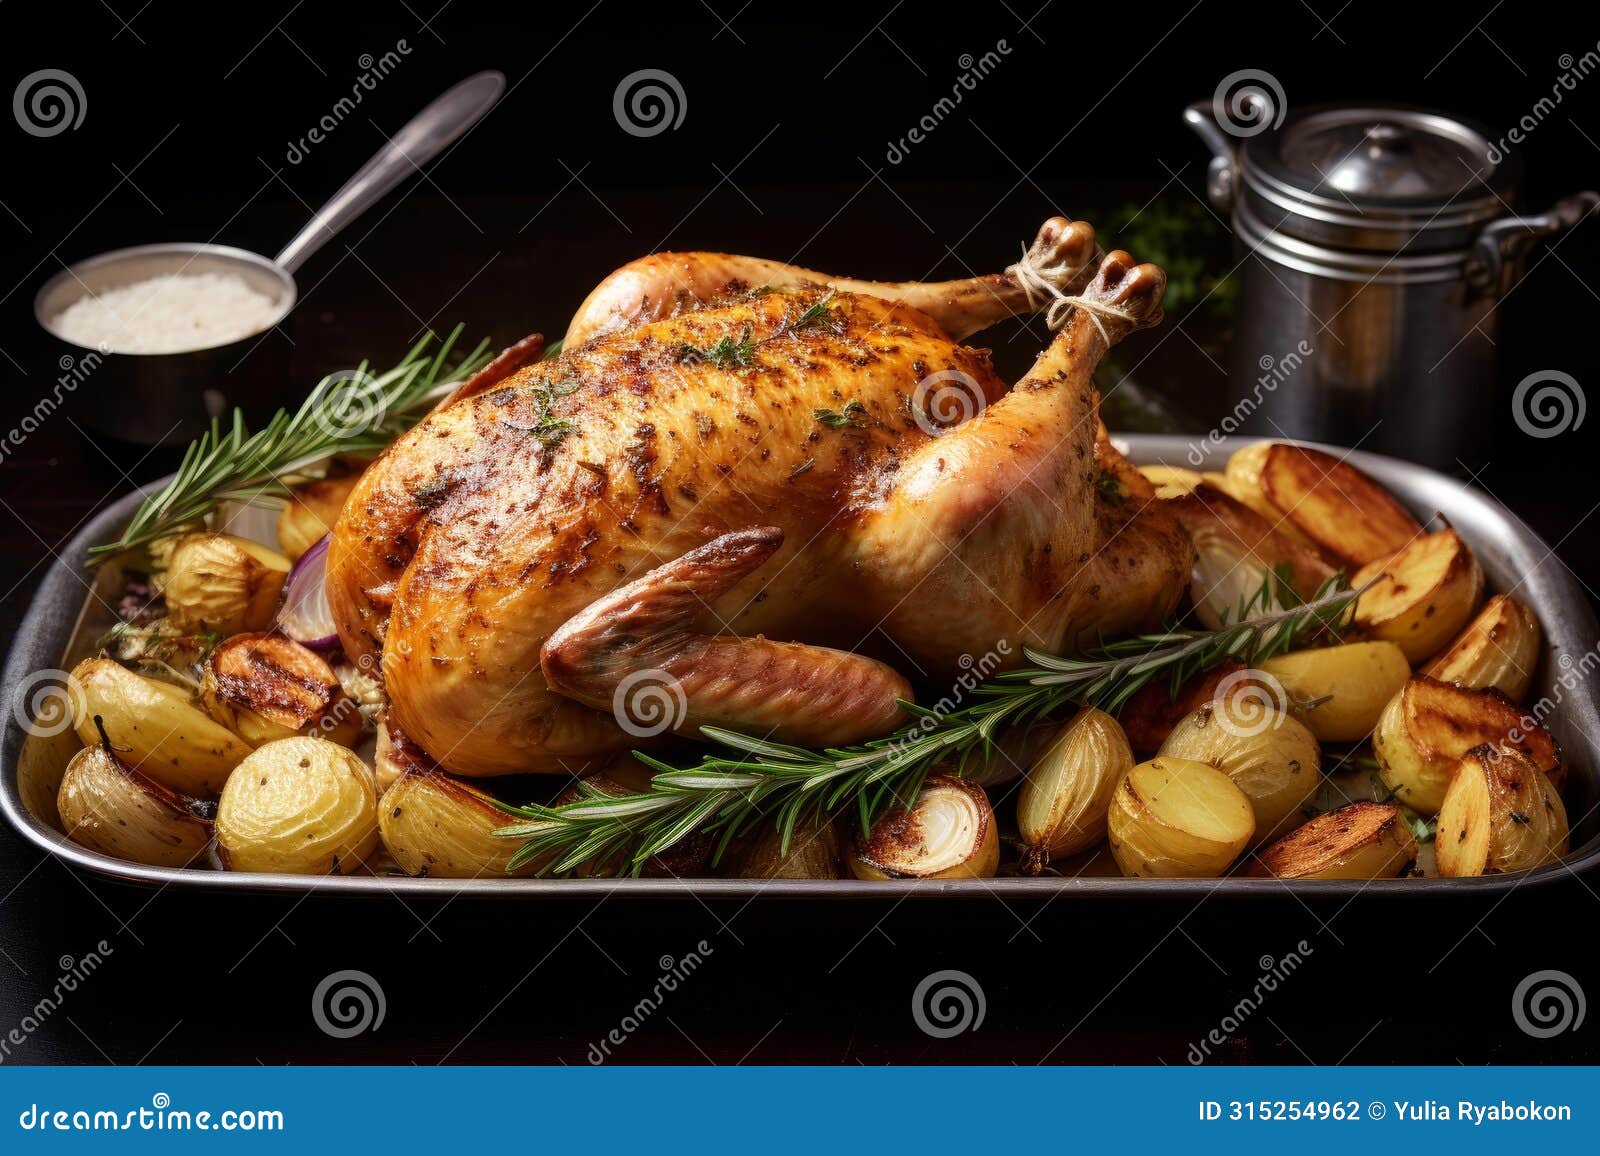 flavorful roast chicken rosemary. generate ai